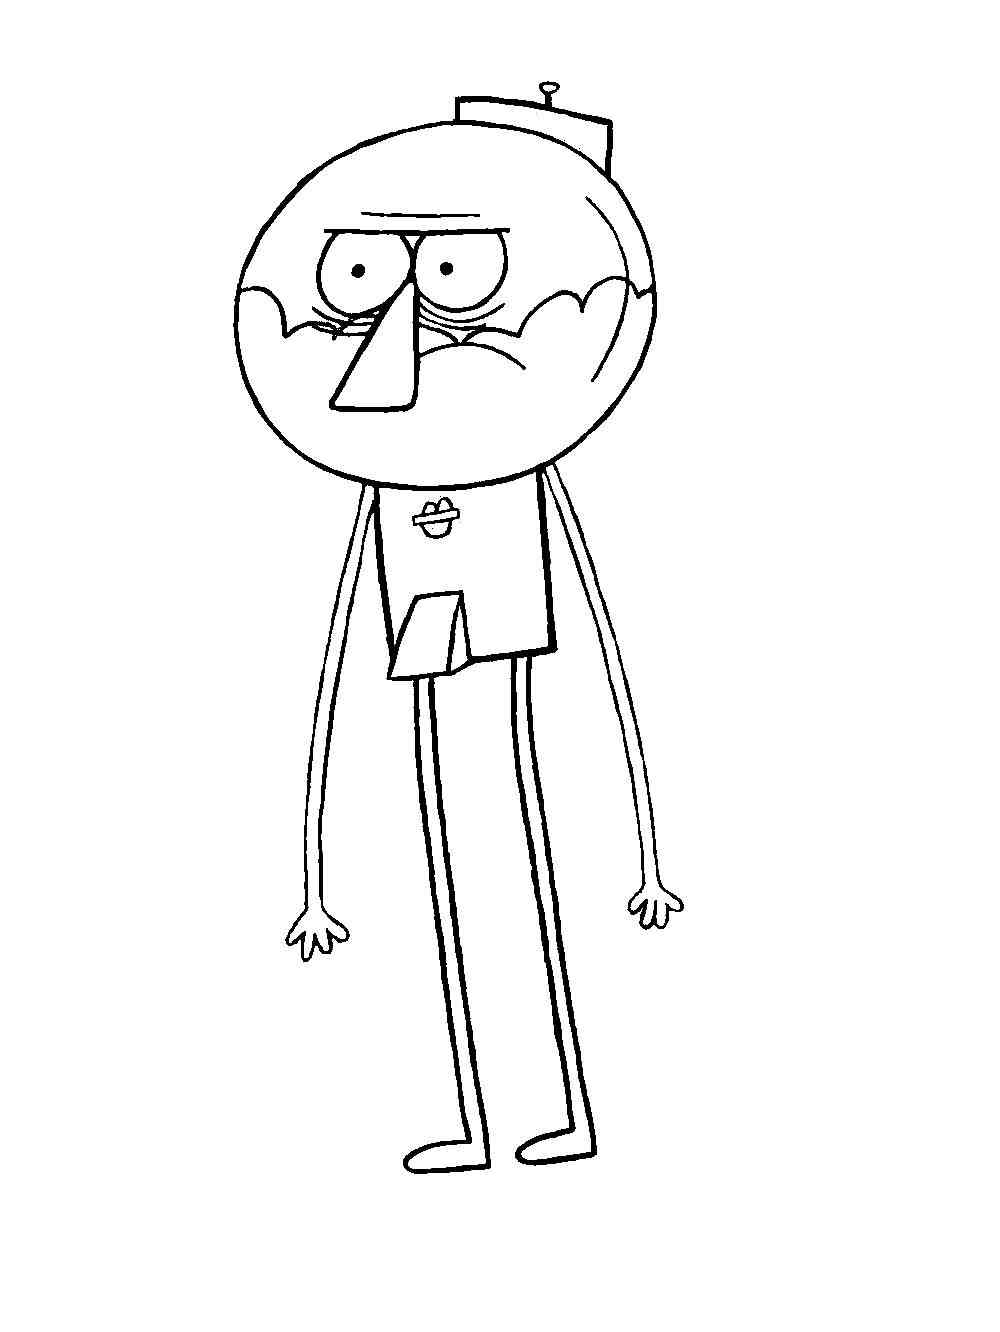 Regular Show coloring pages